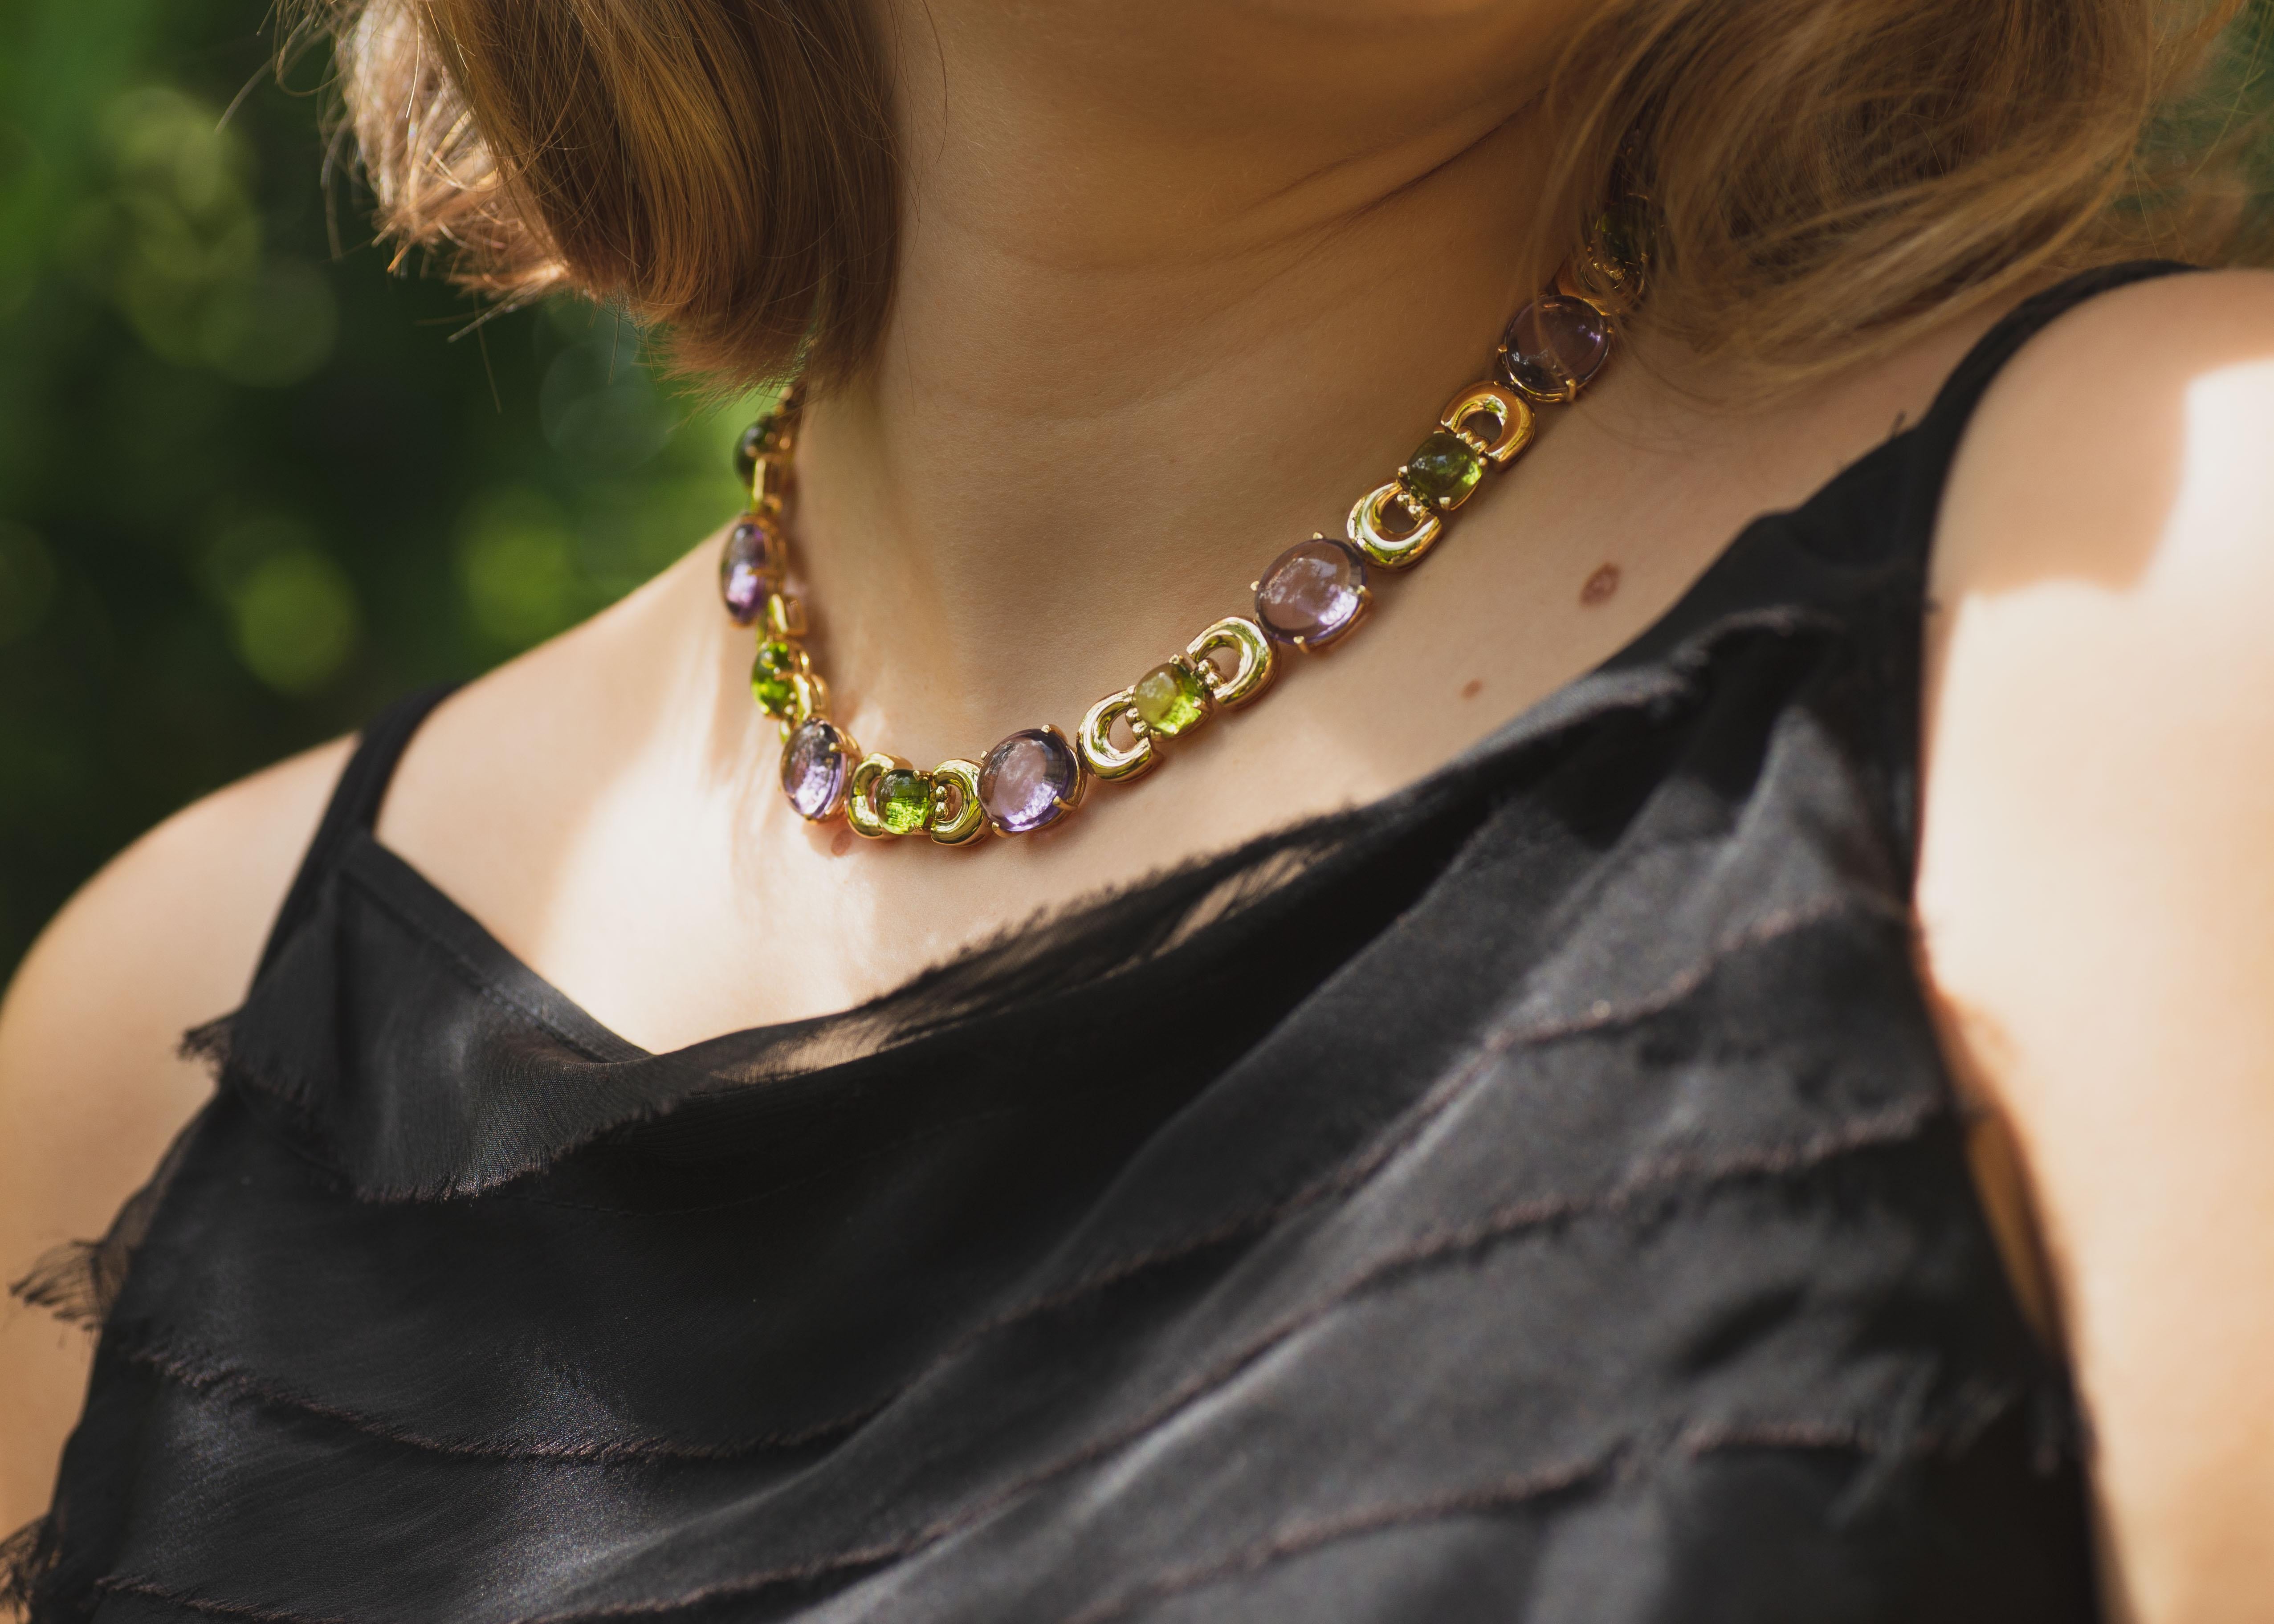 The breathtaking Secret of Berenice Necklace radiates sophistication, showcasing eleven exquisite, almond-cut Amethysts and ten cushion-cut, lime-green Peridots. This elegant necklace is infused with a dash of Italian flair that defines the